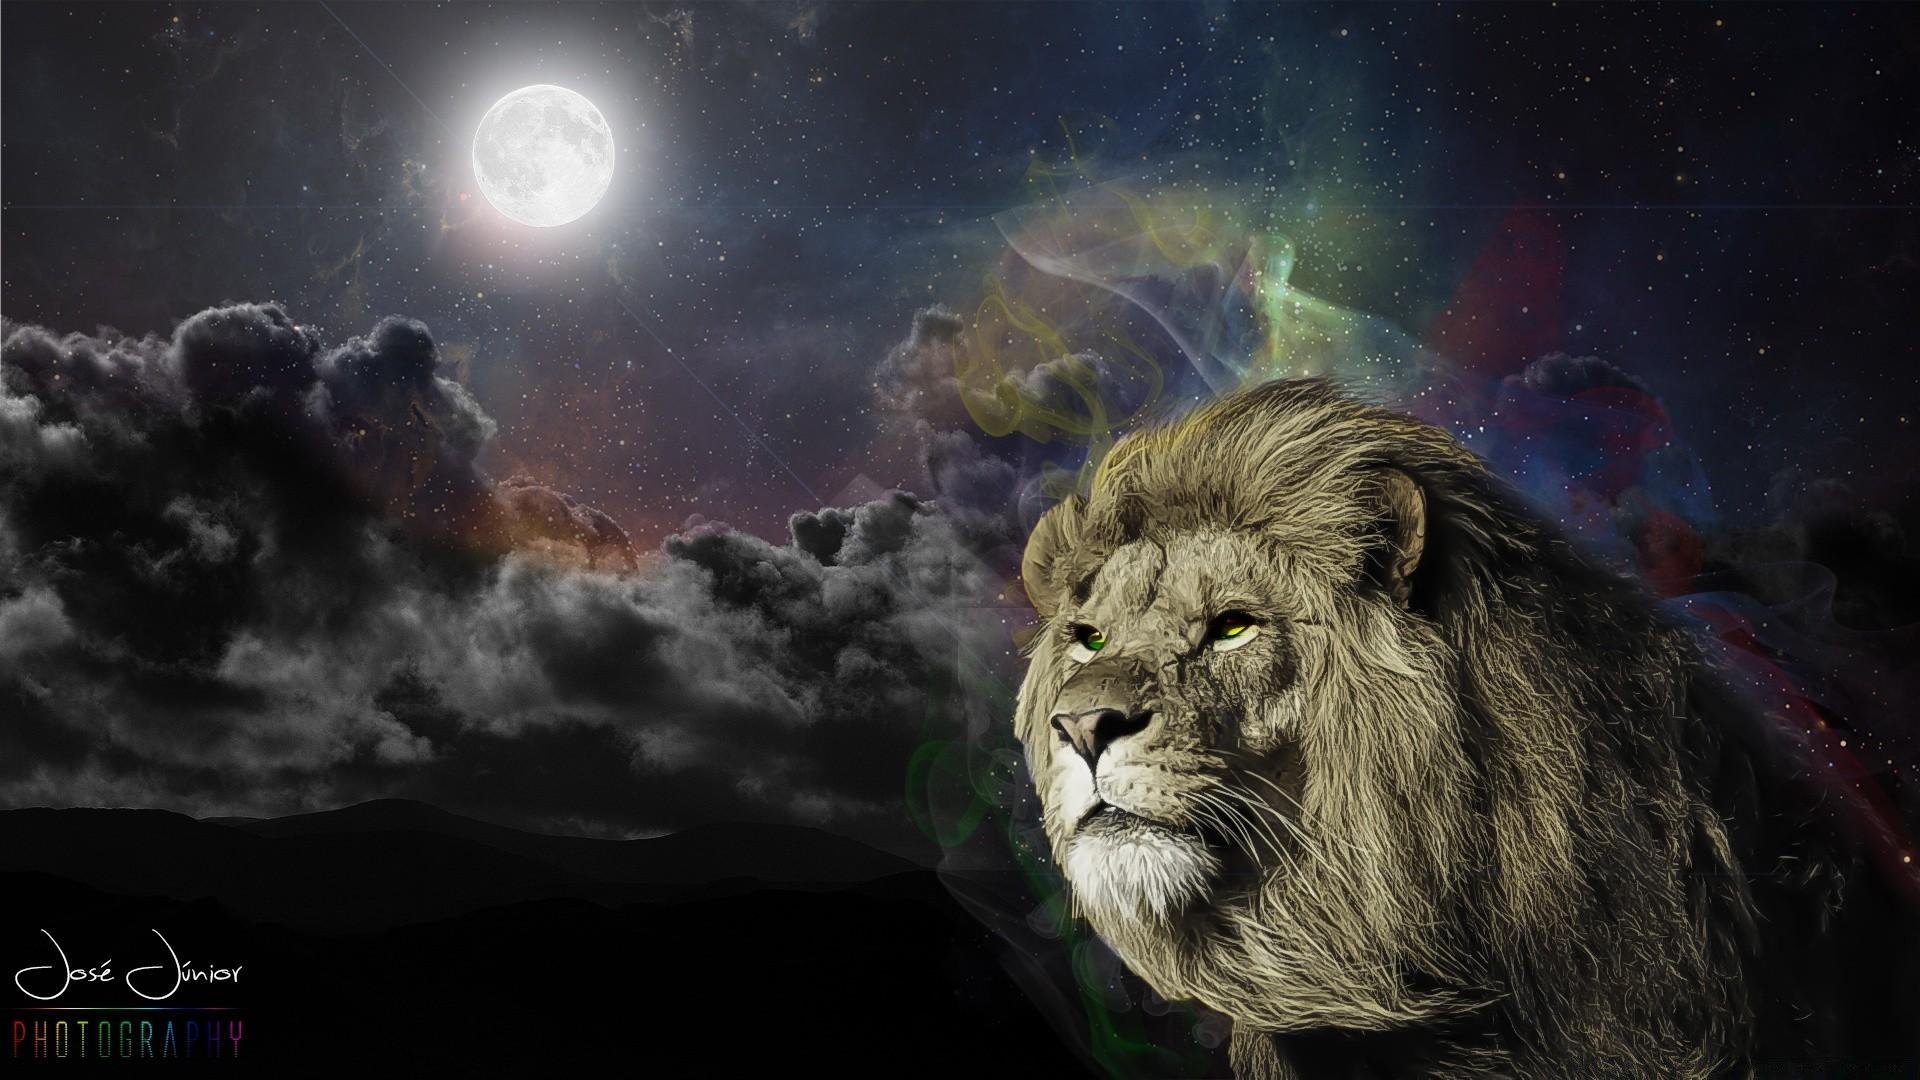 1920 x 1080 · jpeg - The Great Lion - Phone wallpapers